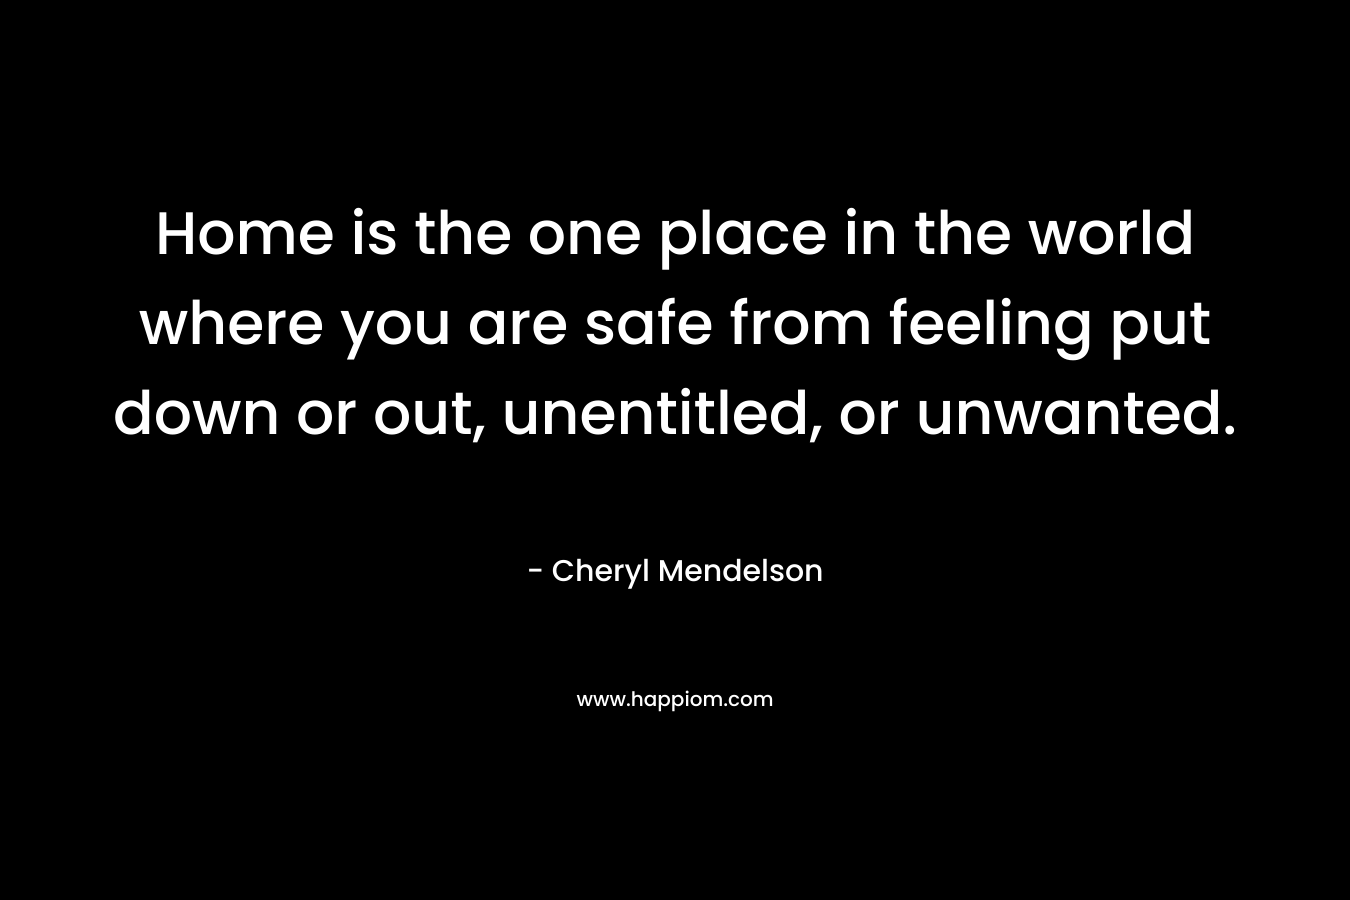 Home is the one place in the world where you are safe from feeling put down or out, unentitled, or unwanted.